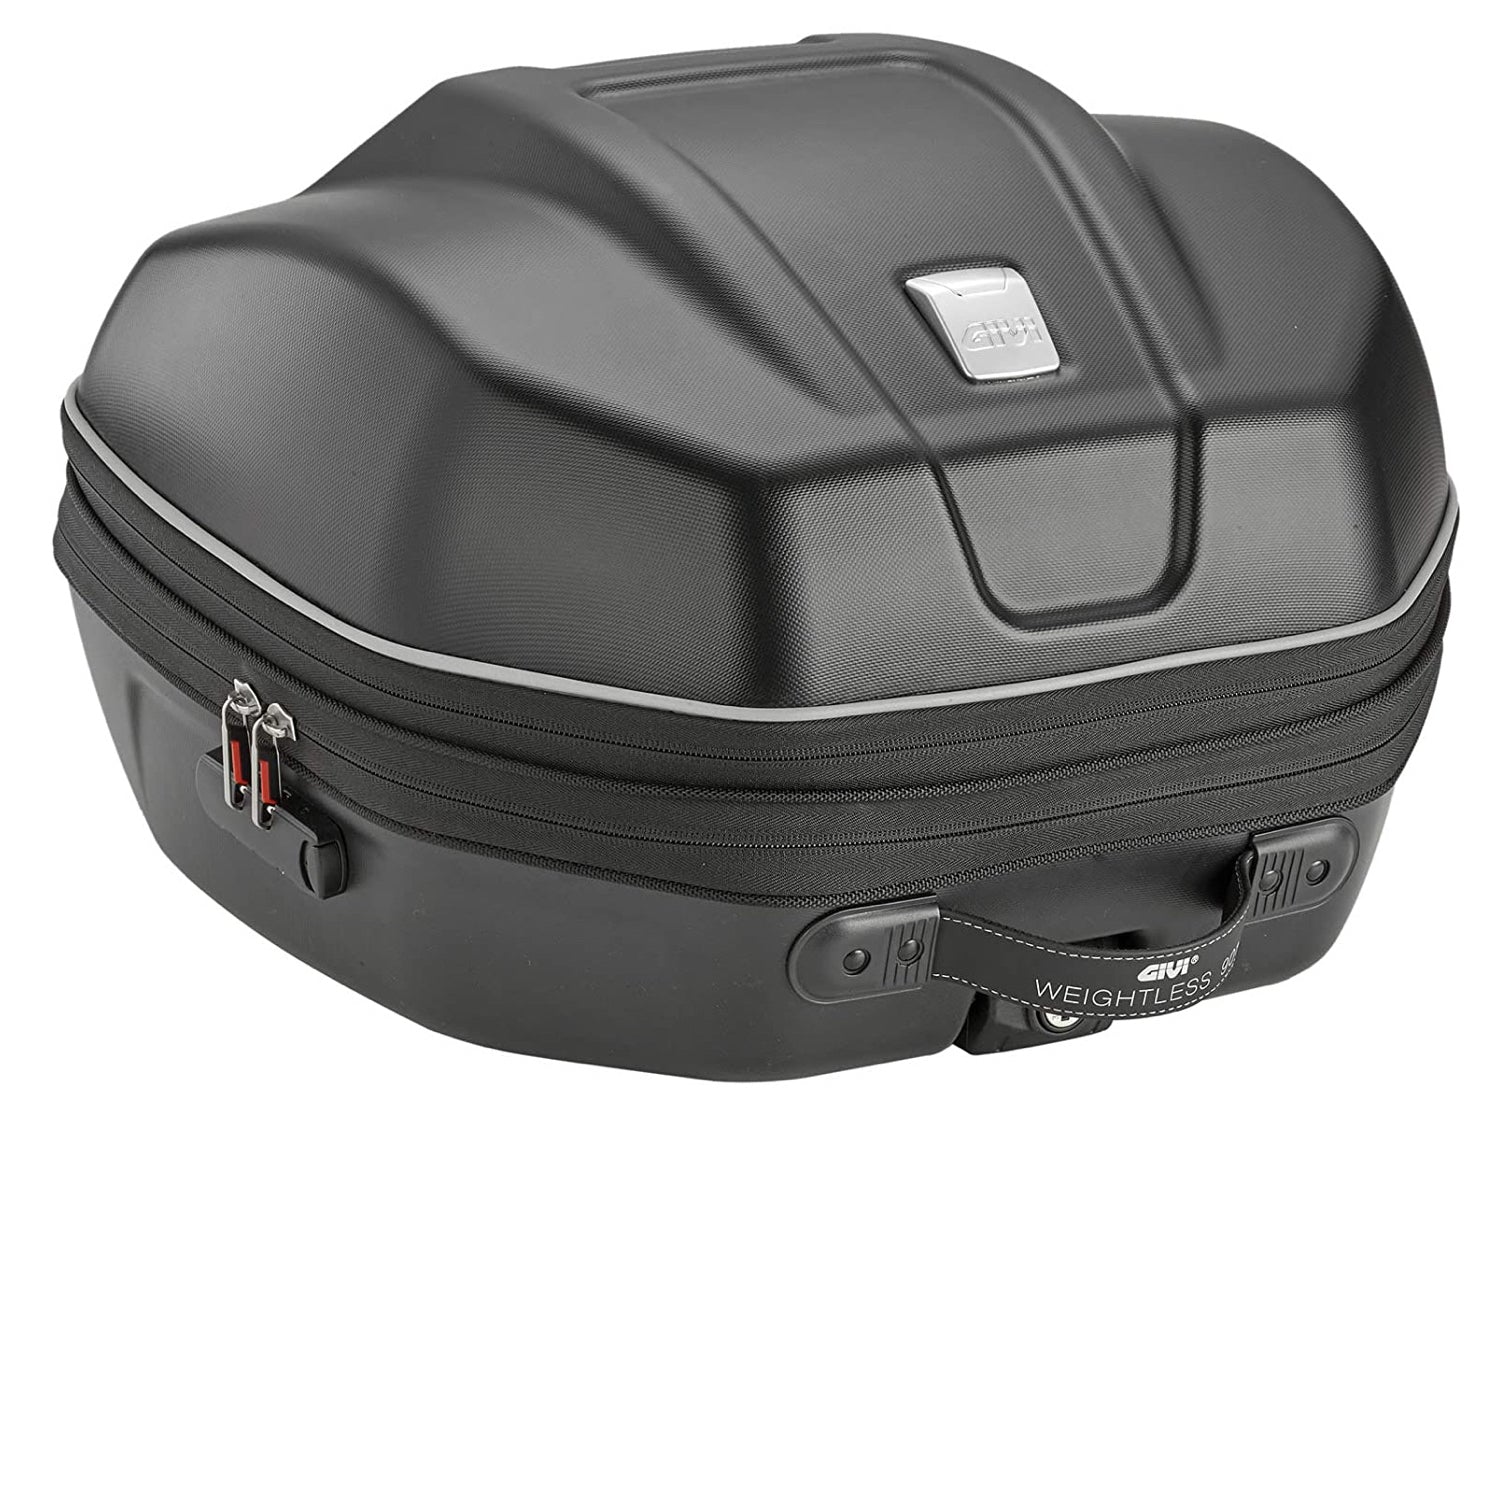 GIVI BAULETTO WL901 WEIGHTLESS COMPATIBILE CON KYMCO DOWNTOWN ABS 125 I 15/20